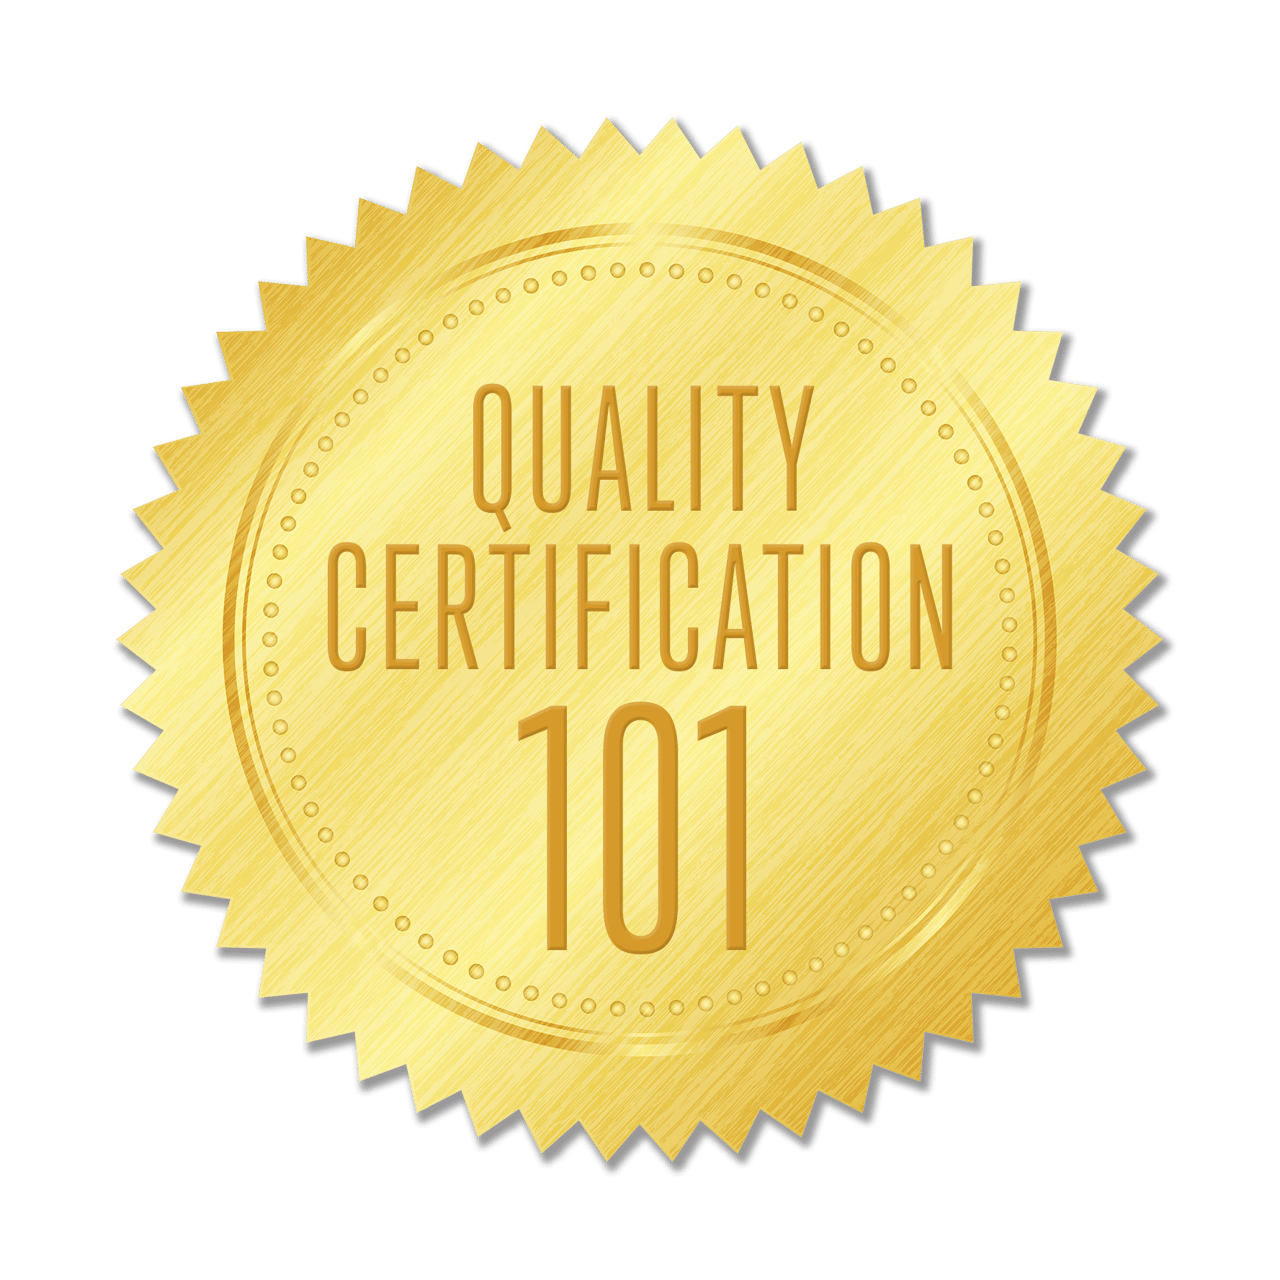 Quality Certification 101